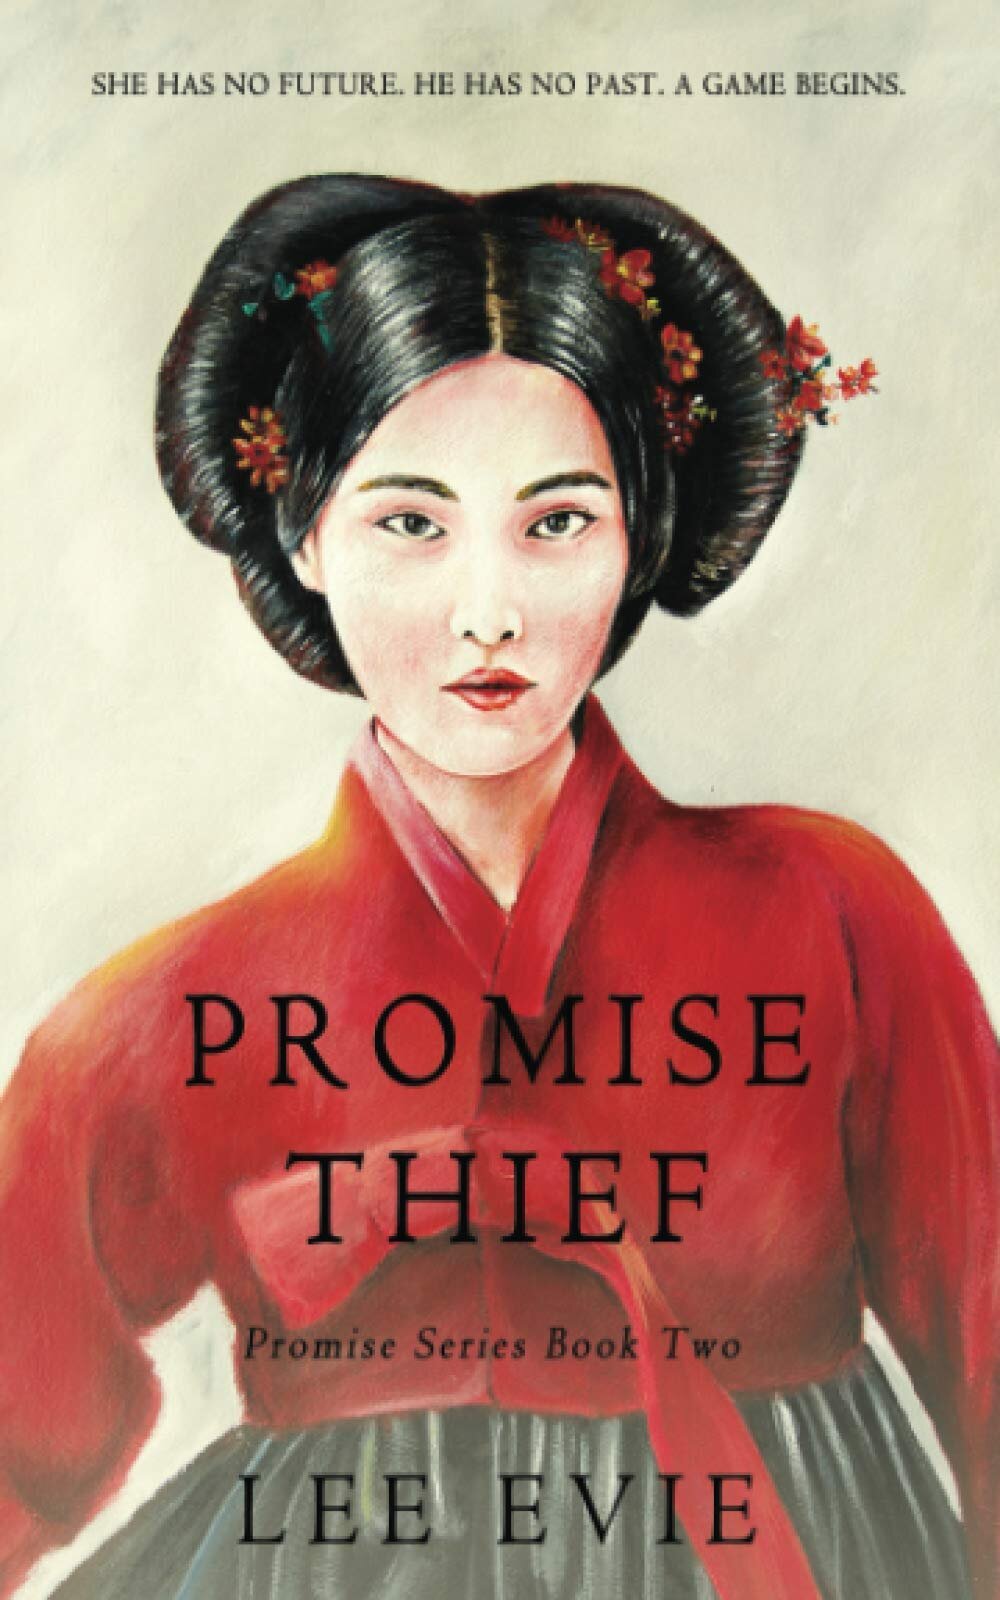 Promise Thief by Lee Evie.jpeg